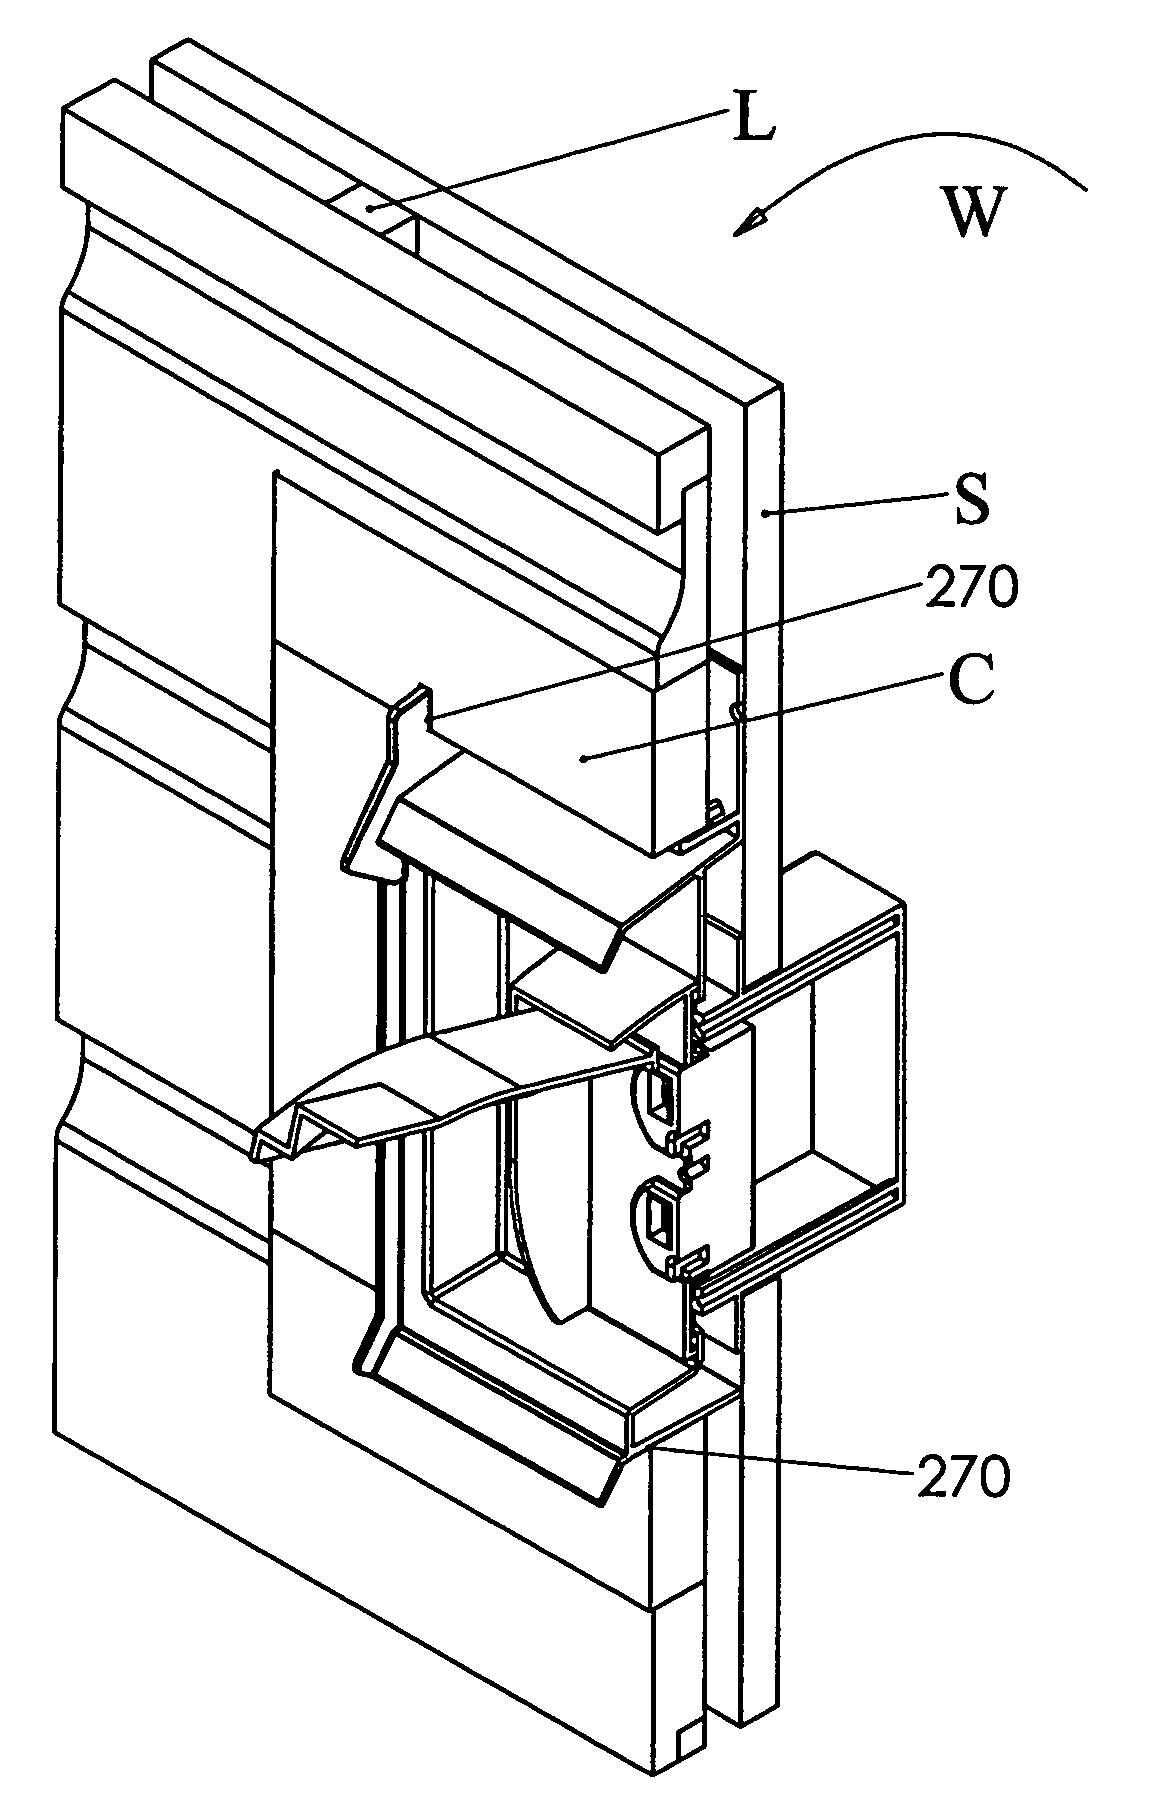 Water deviation unit for external wall fixtures